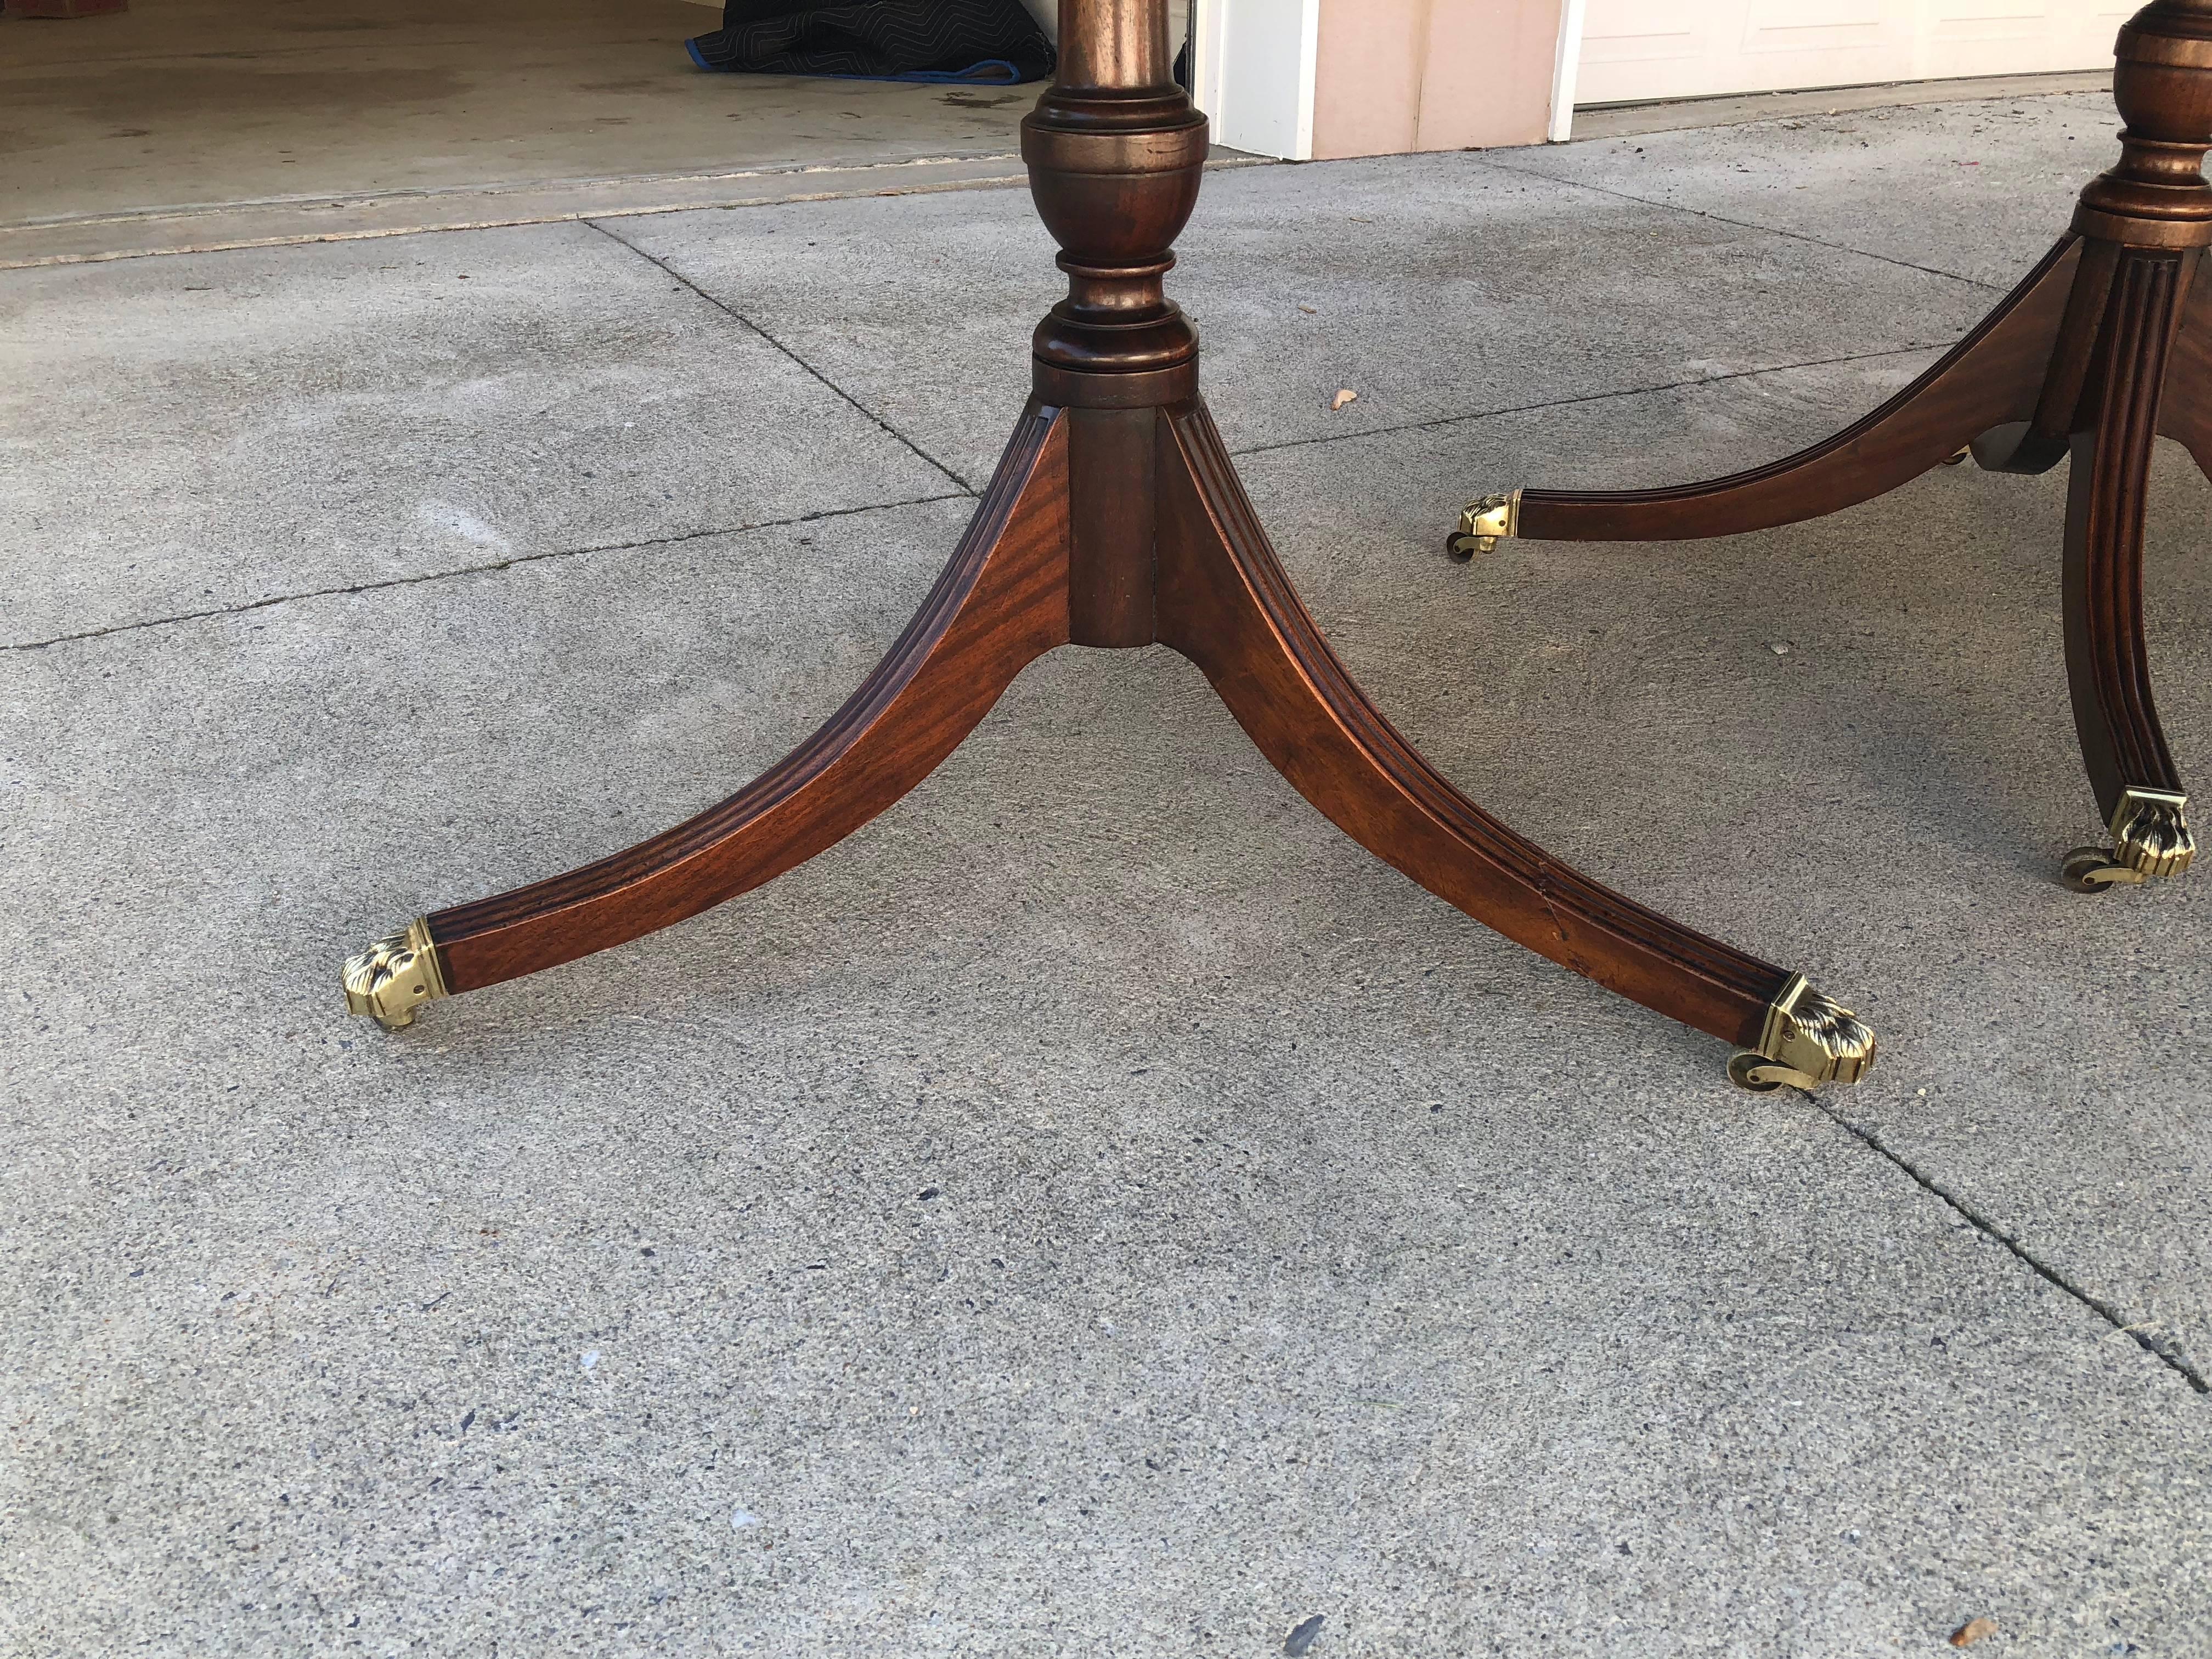 19th century English Regency solid mahogany three-piece banquet table. One leaf is slightly darker due to storage. The middle pedestal has four legs and the two banquet ends has three legs with bronze casters.
 